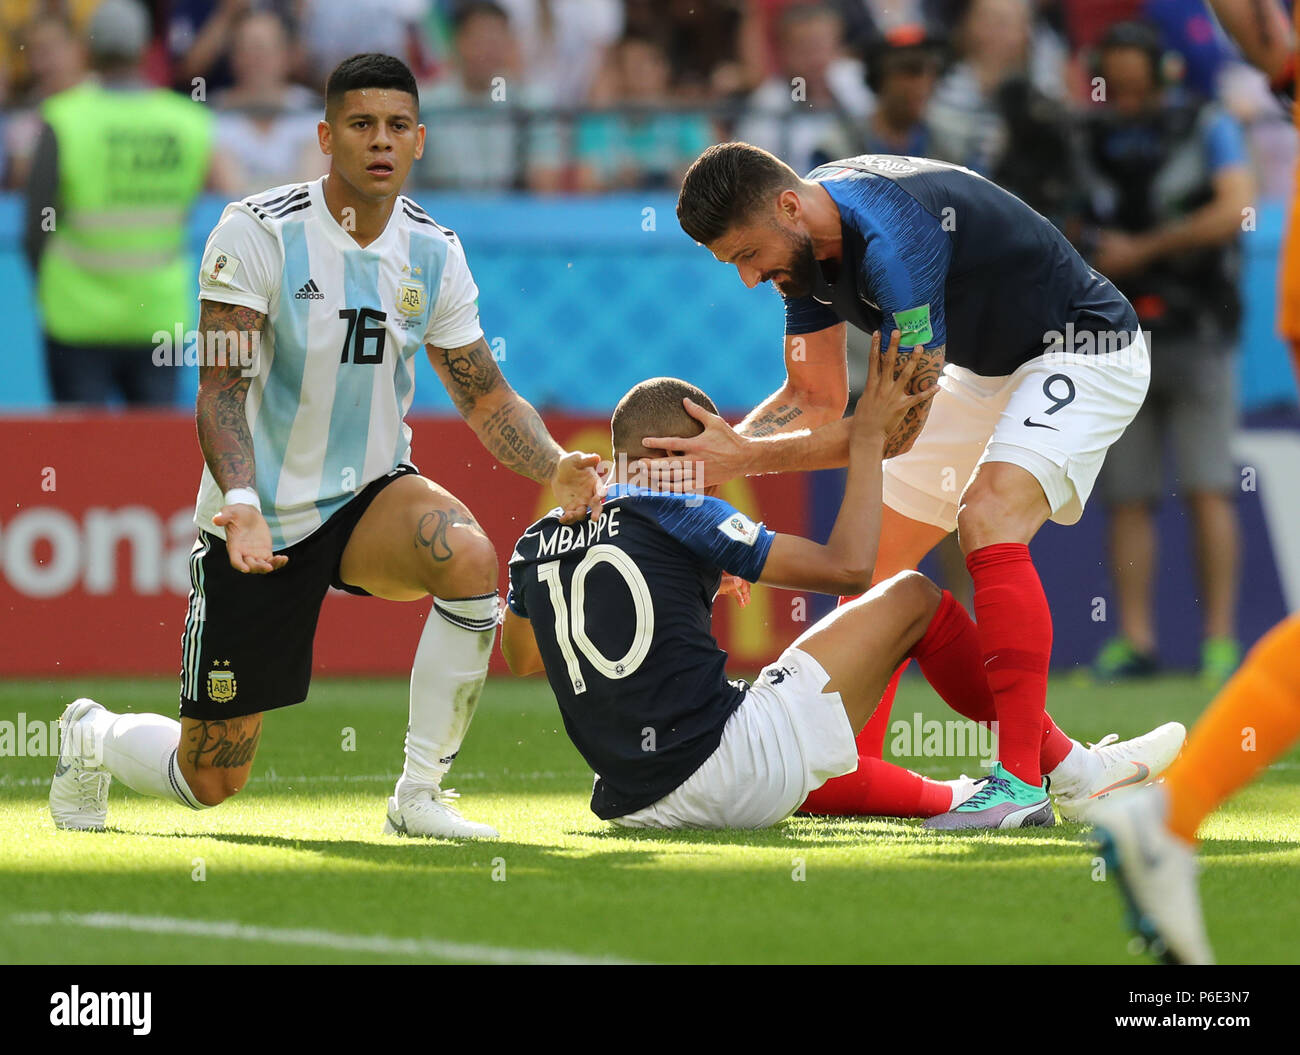 (180630) -- KAZAN, June 30, 2018 (Xinhua) -- Kylian Mbappe (C) of France celebrates with teammate Olivier Giroud (R) after being awarded a penalty kick after a foul by Marcos Rojo of Argentina during the 2018 FIFA World Cup round of 16 match between France and Argentina in Kazan, Russia, on June 30, 2018. (Xinhua/Lu Jinbo) Stock Photo